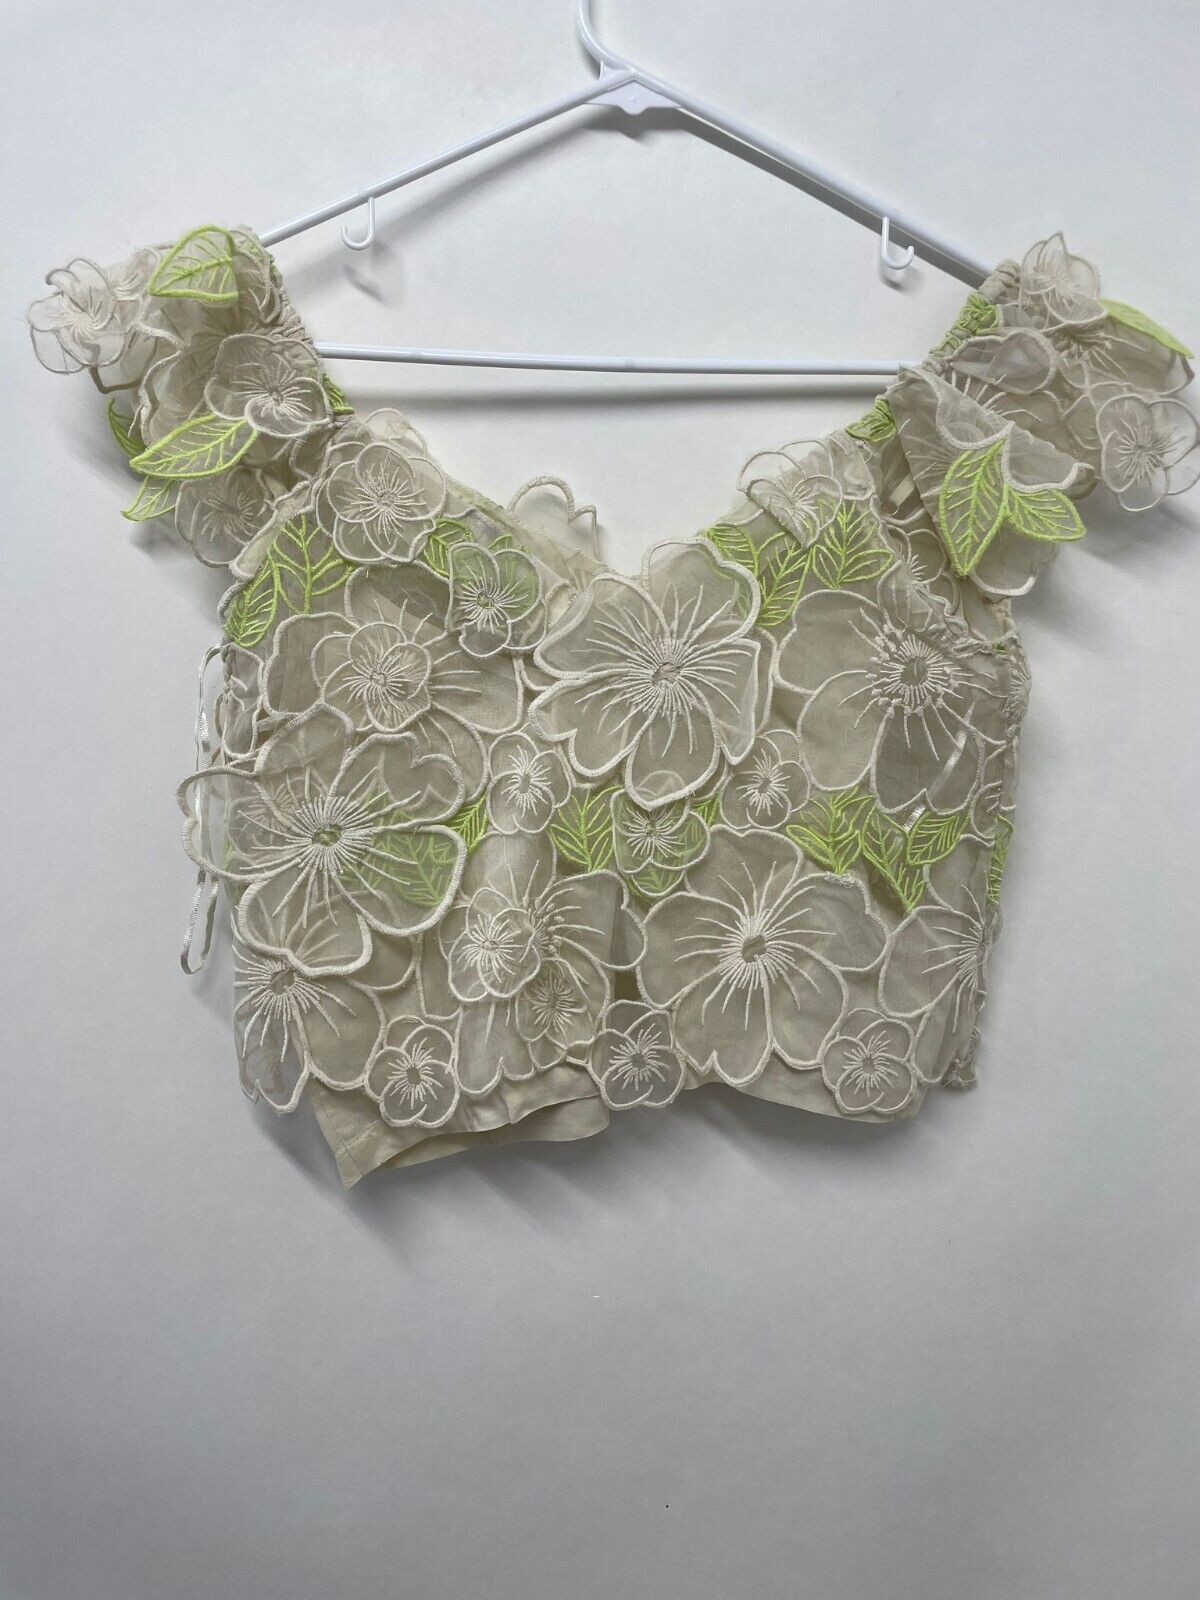 by anthropologie Women XS Sheer Applique Crop Top Floral Ivory Neon Green Blouse